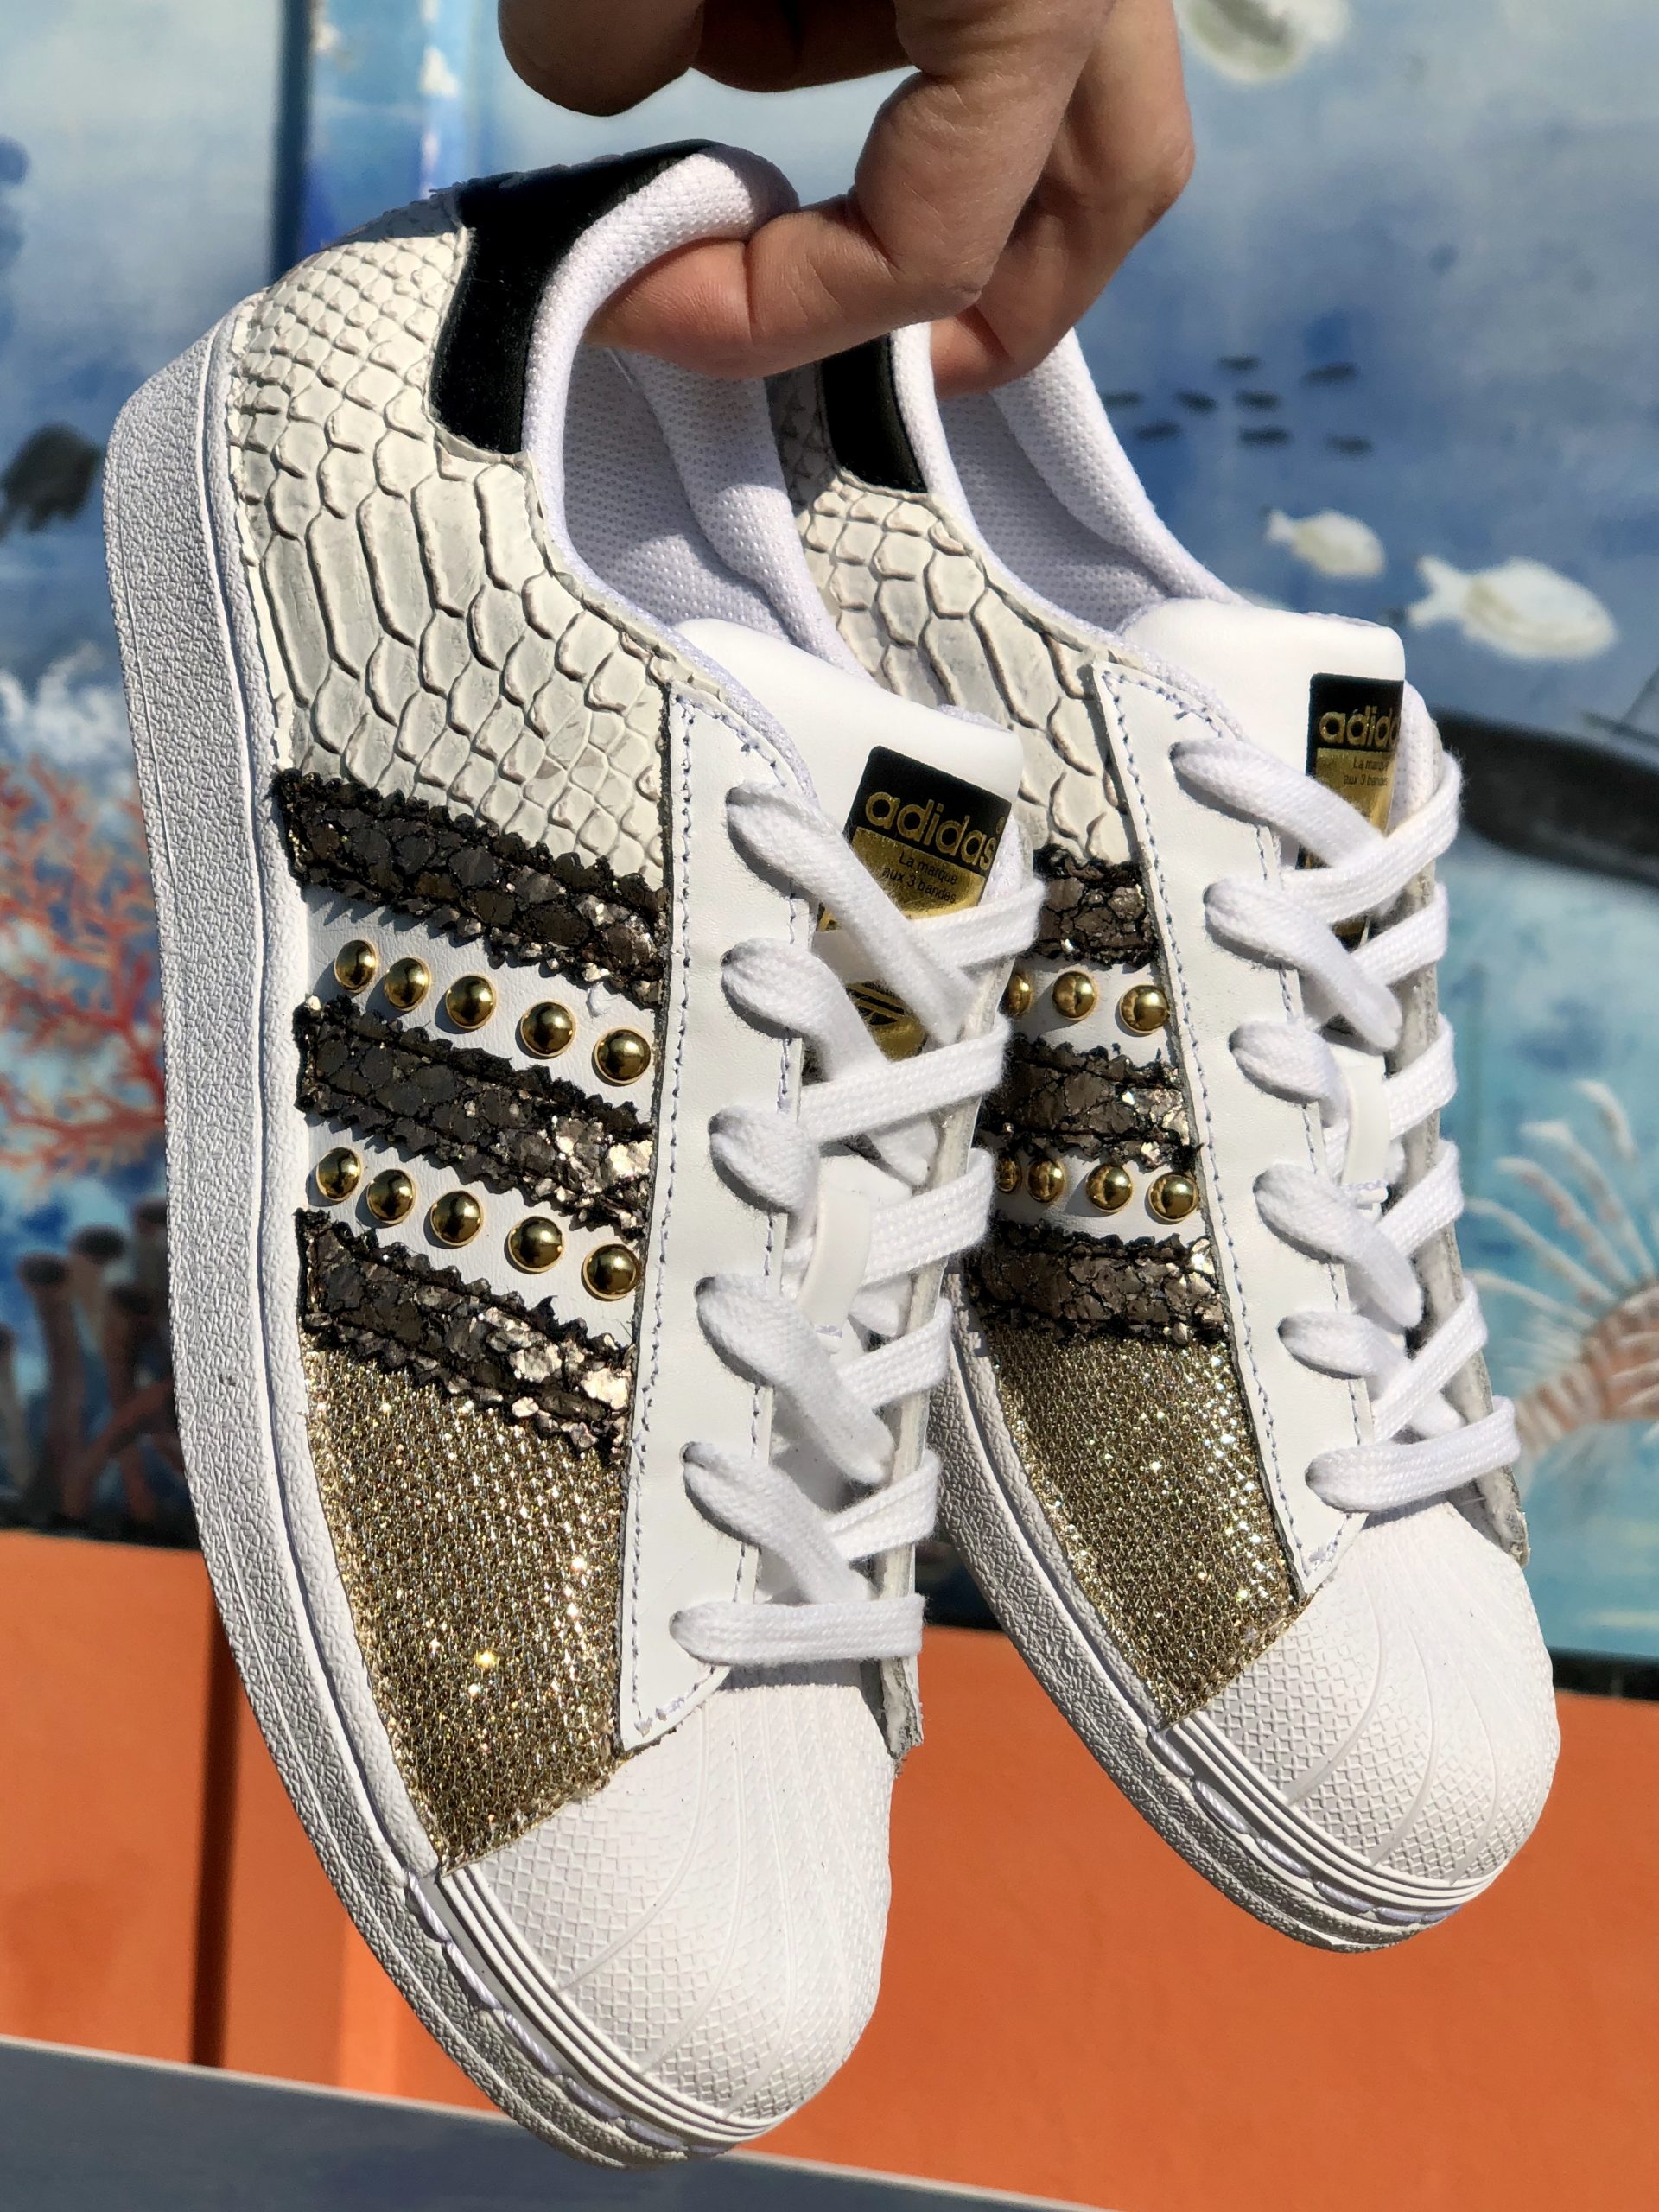 Adidas Superstar Personalizzate Off-White Oro عطر مفارش